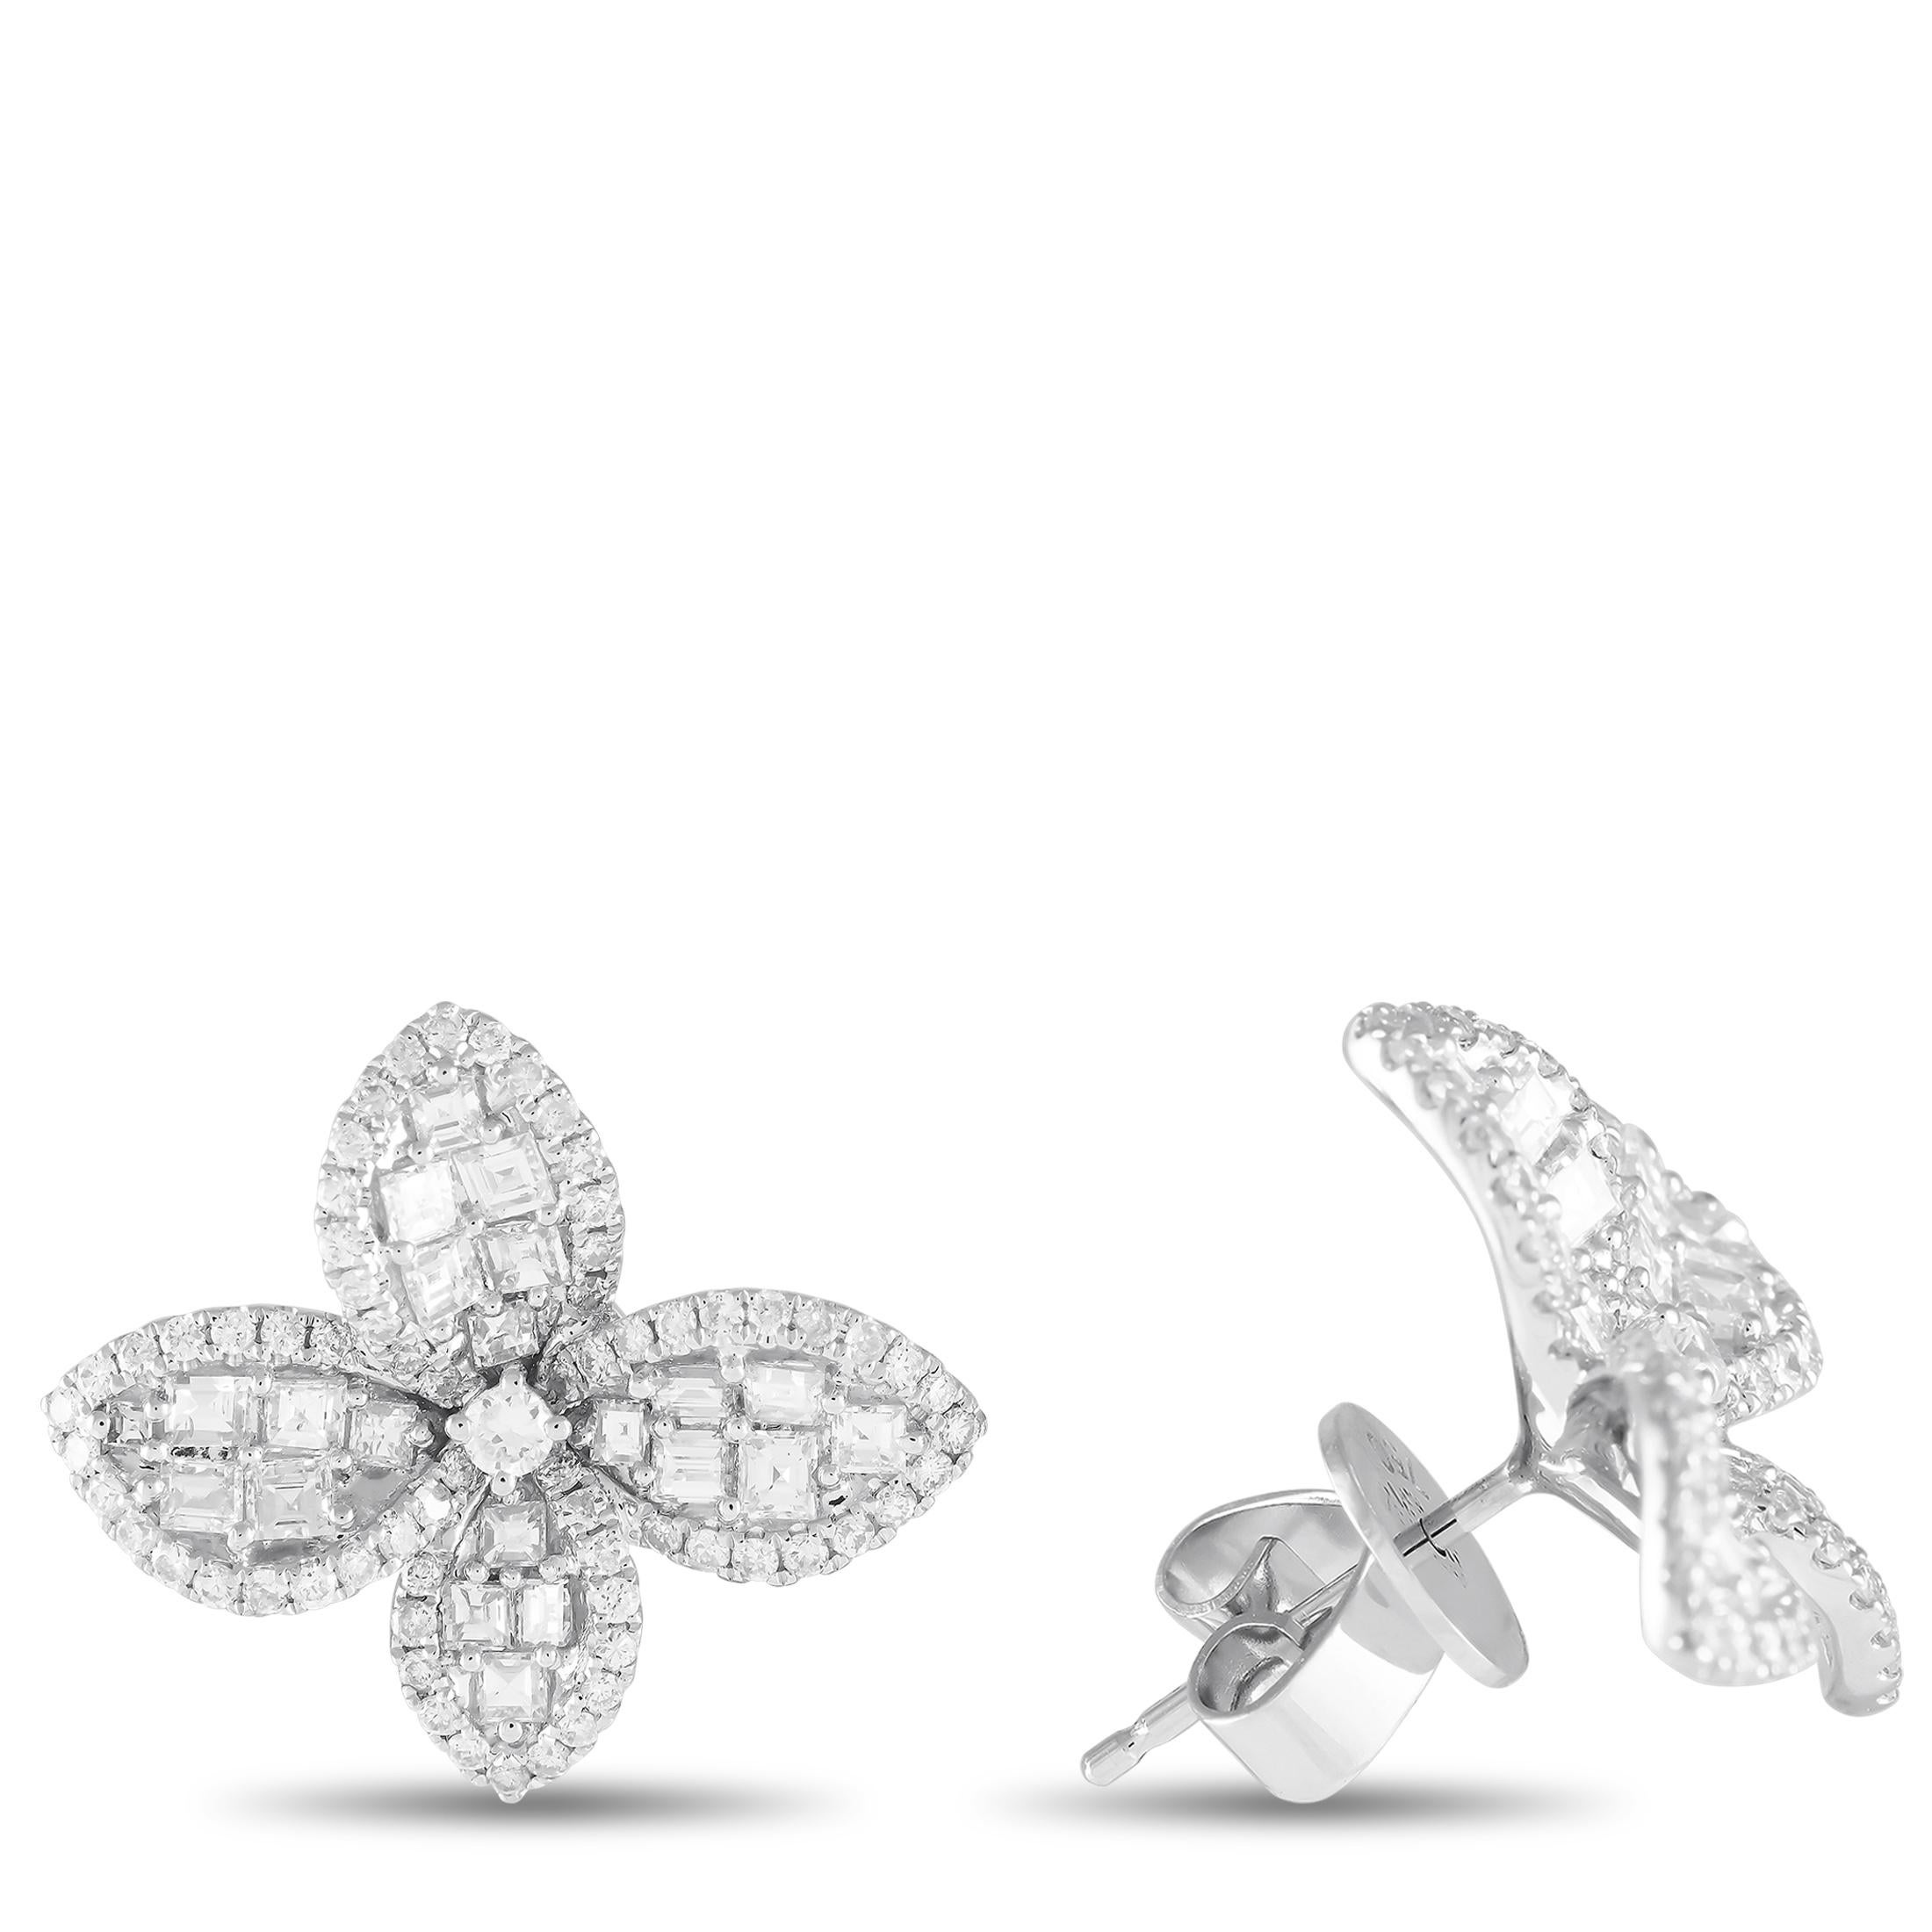 A stunning bloom-inspired sparkler that can be worn for a variety of special occasions, including cocktail parties and date nights. Each earring is fashioned in 18K white gold and has a four-petal flower shape. Round diamonds trace the edges of each